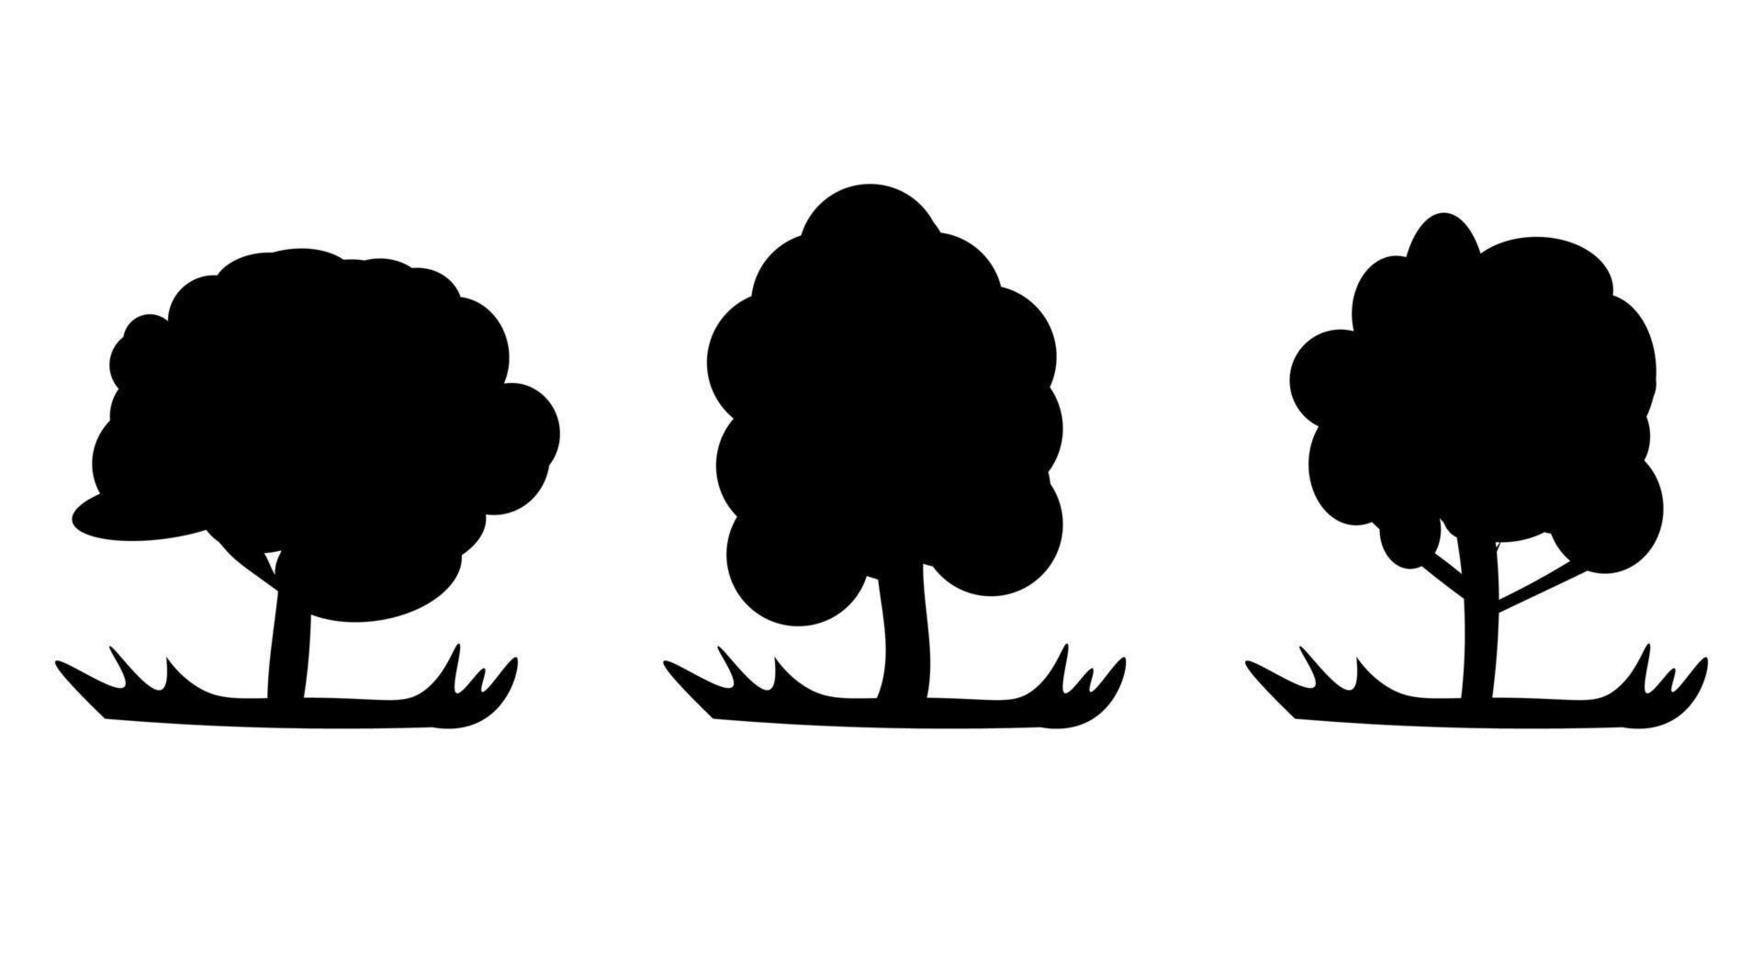 Silhouettes of trees in vector eps 10. Silhouettes of various trees